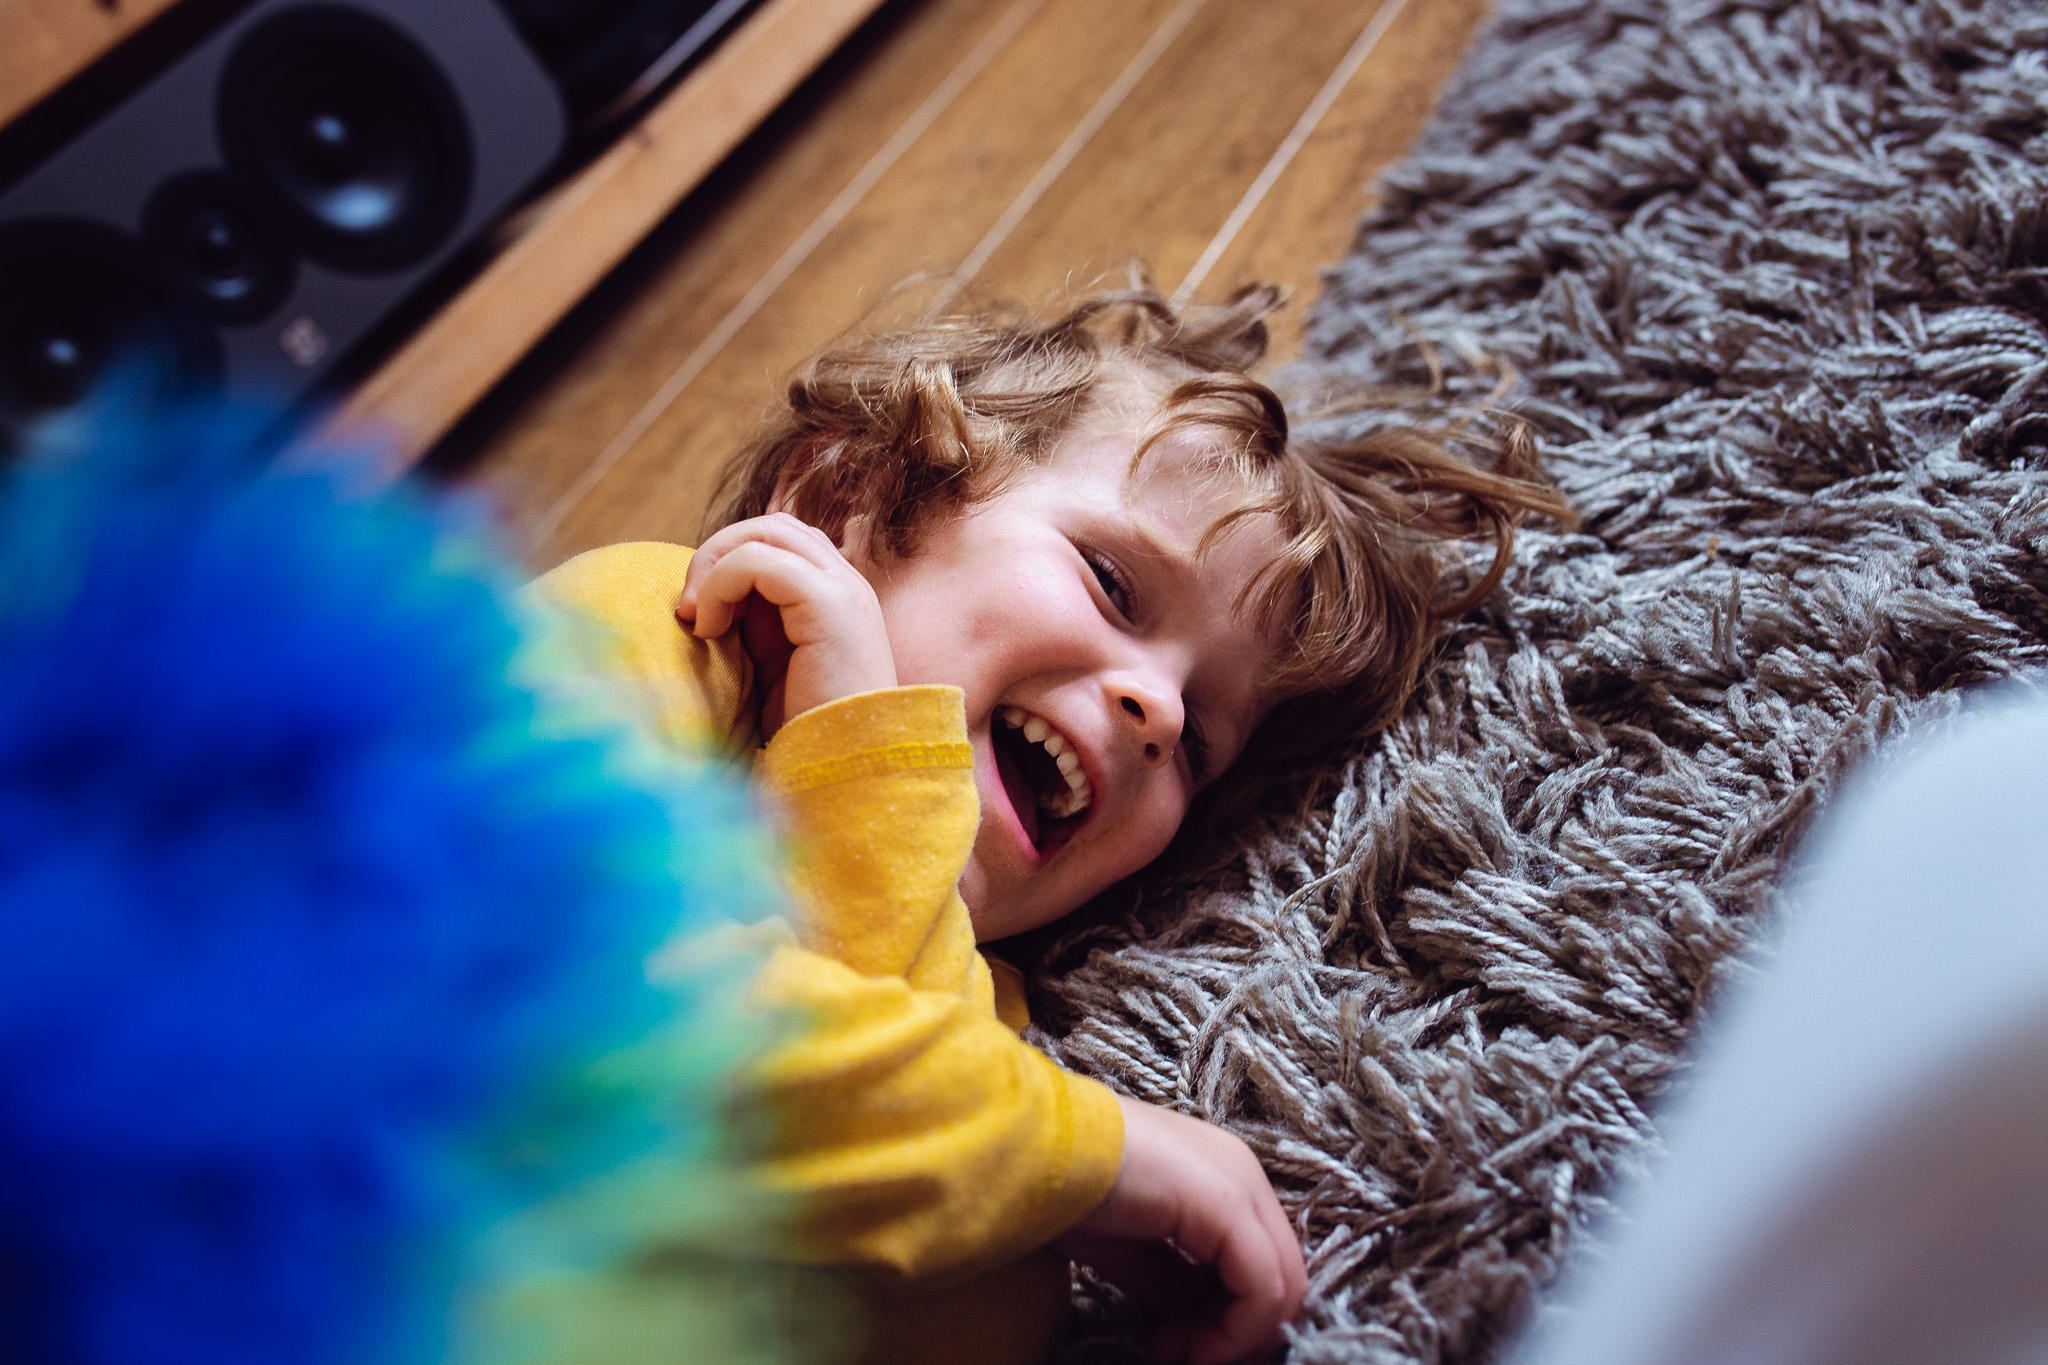 Leo laughing and lying down on a fluffy carpet during a family photo session